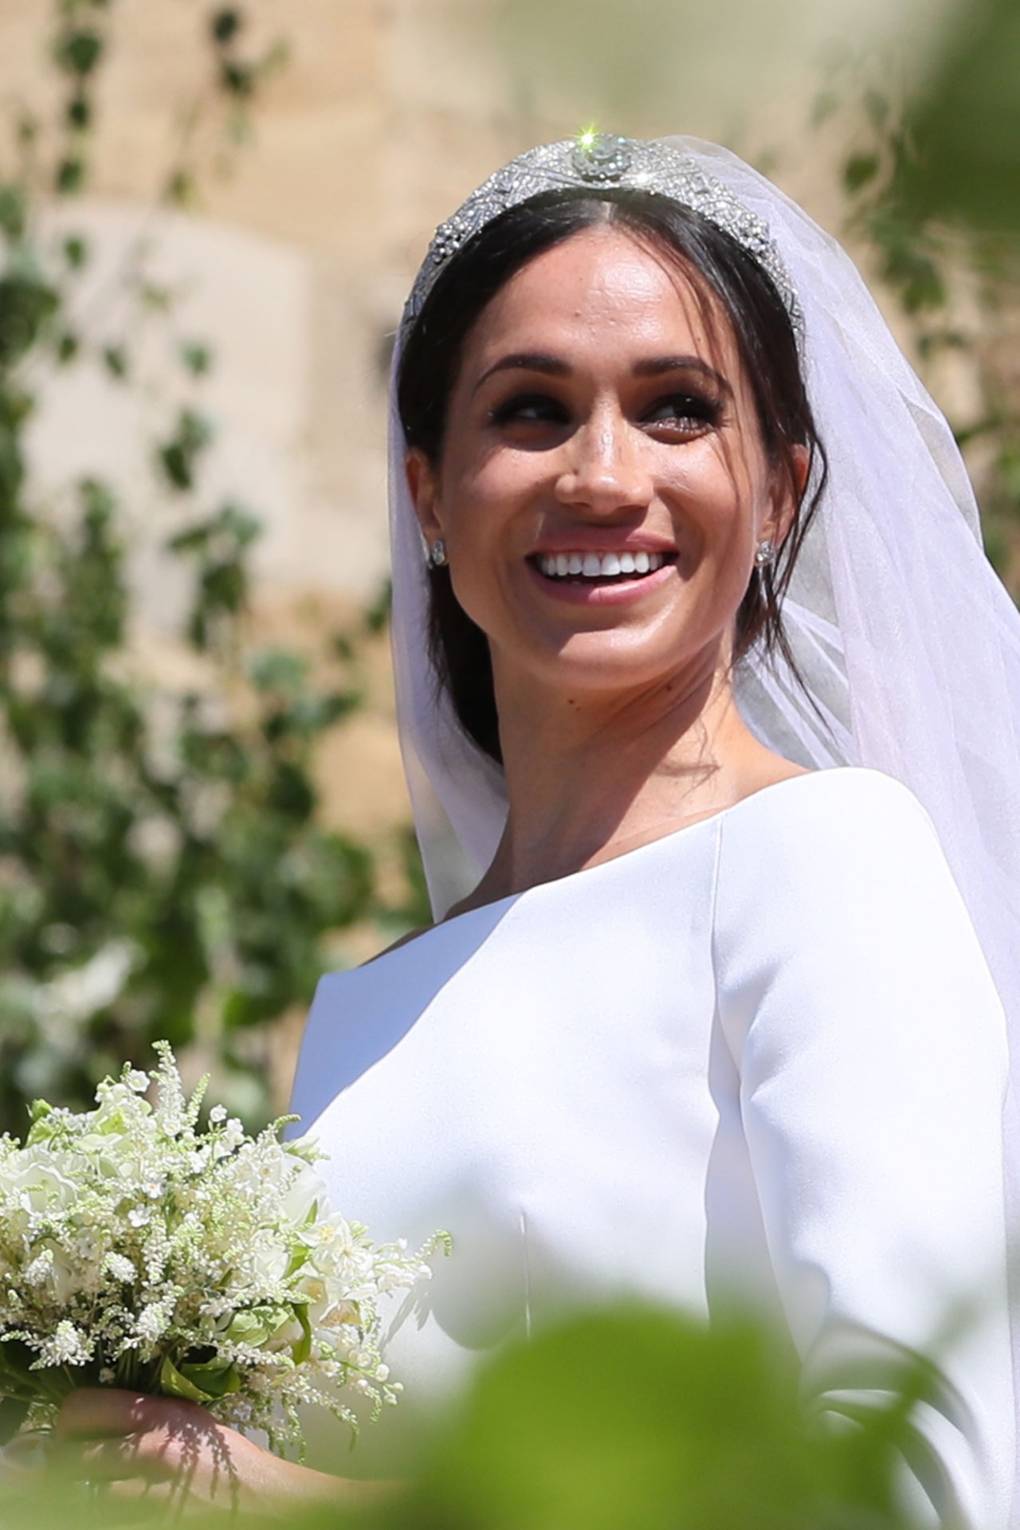 Close up of Meghan Markle's wedding dress and tiara in the sunshine